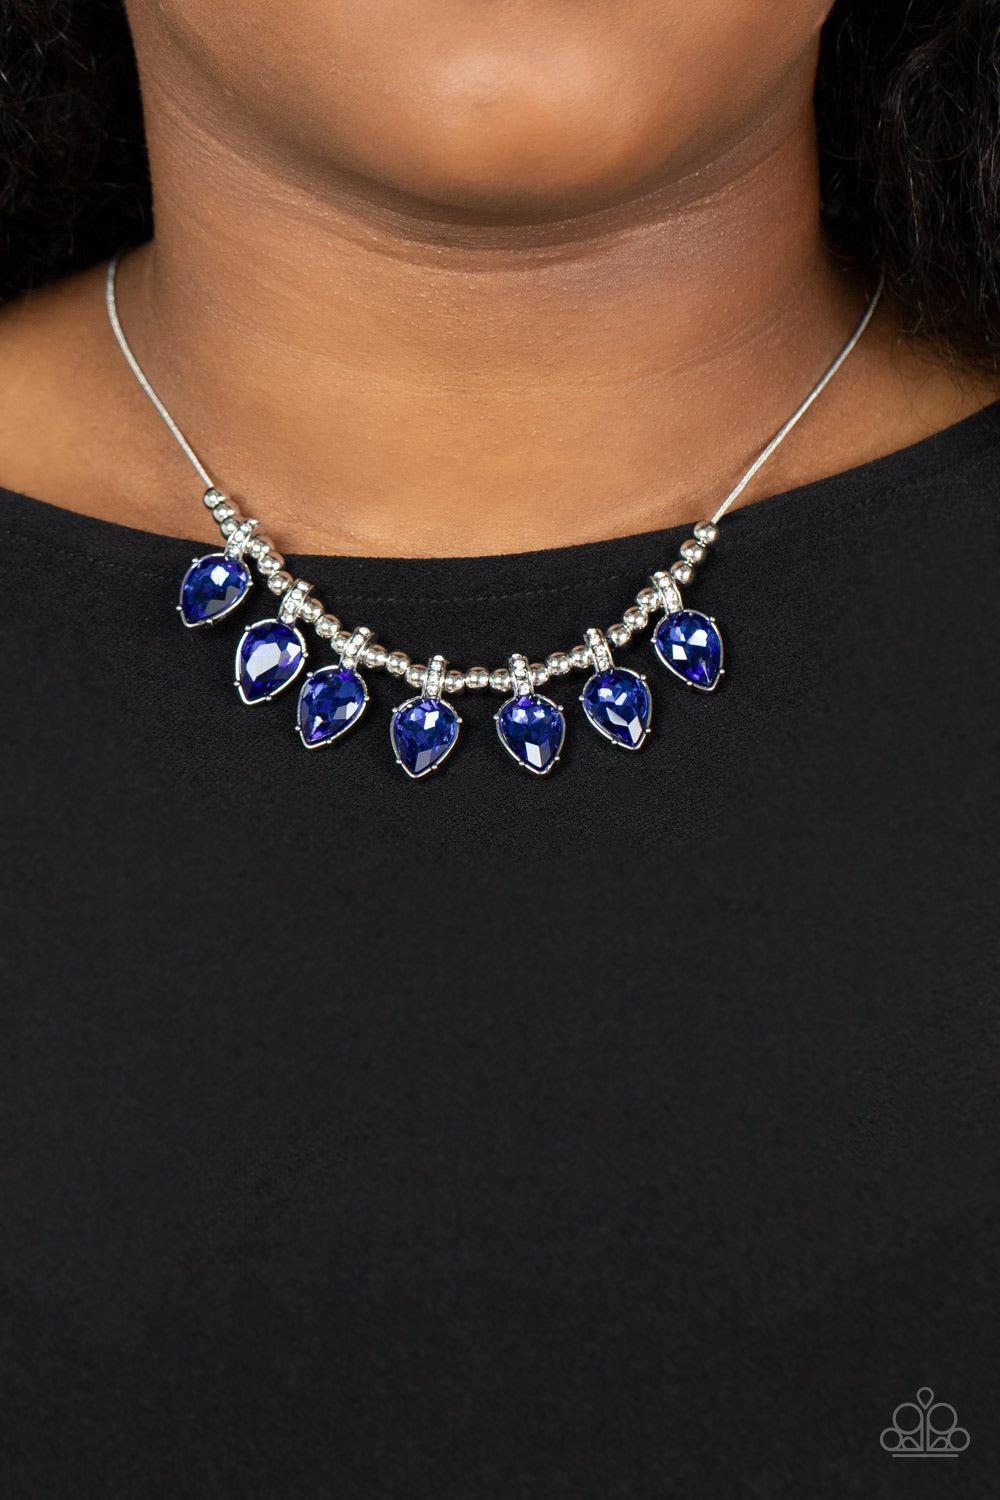 Crown Jewel Couture Blue Rhinestone Necklace - Paparazzi Accessories-on model - CarasShop.com - $5 Jewelry by Cara Jewels